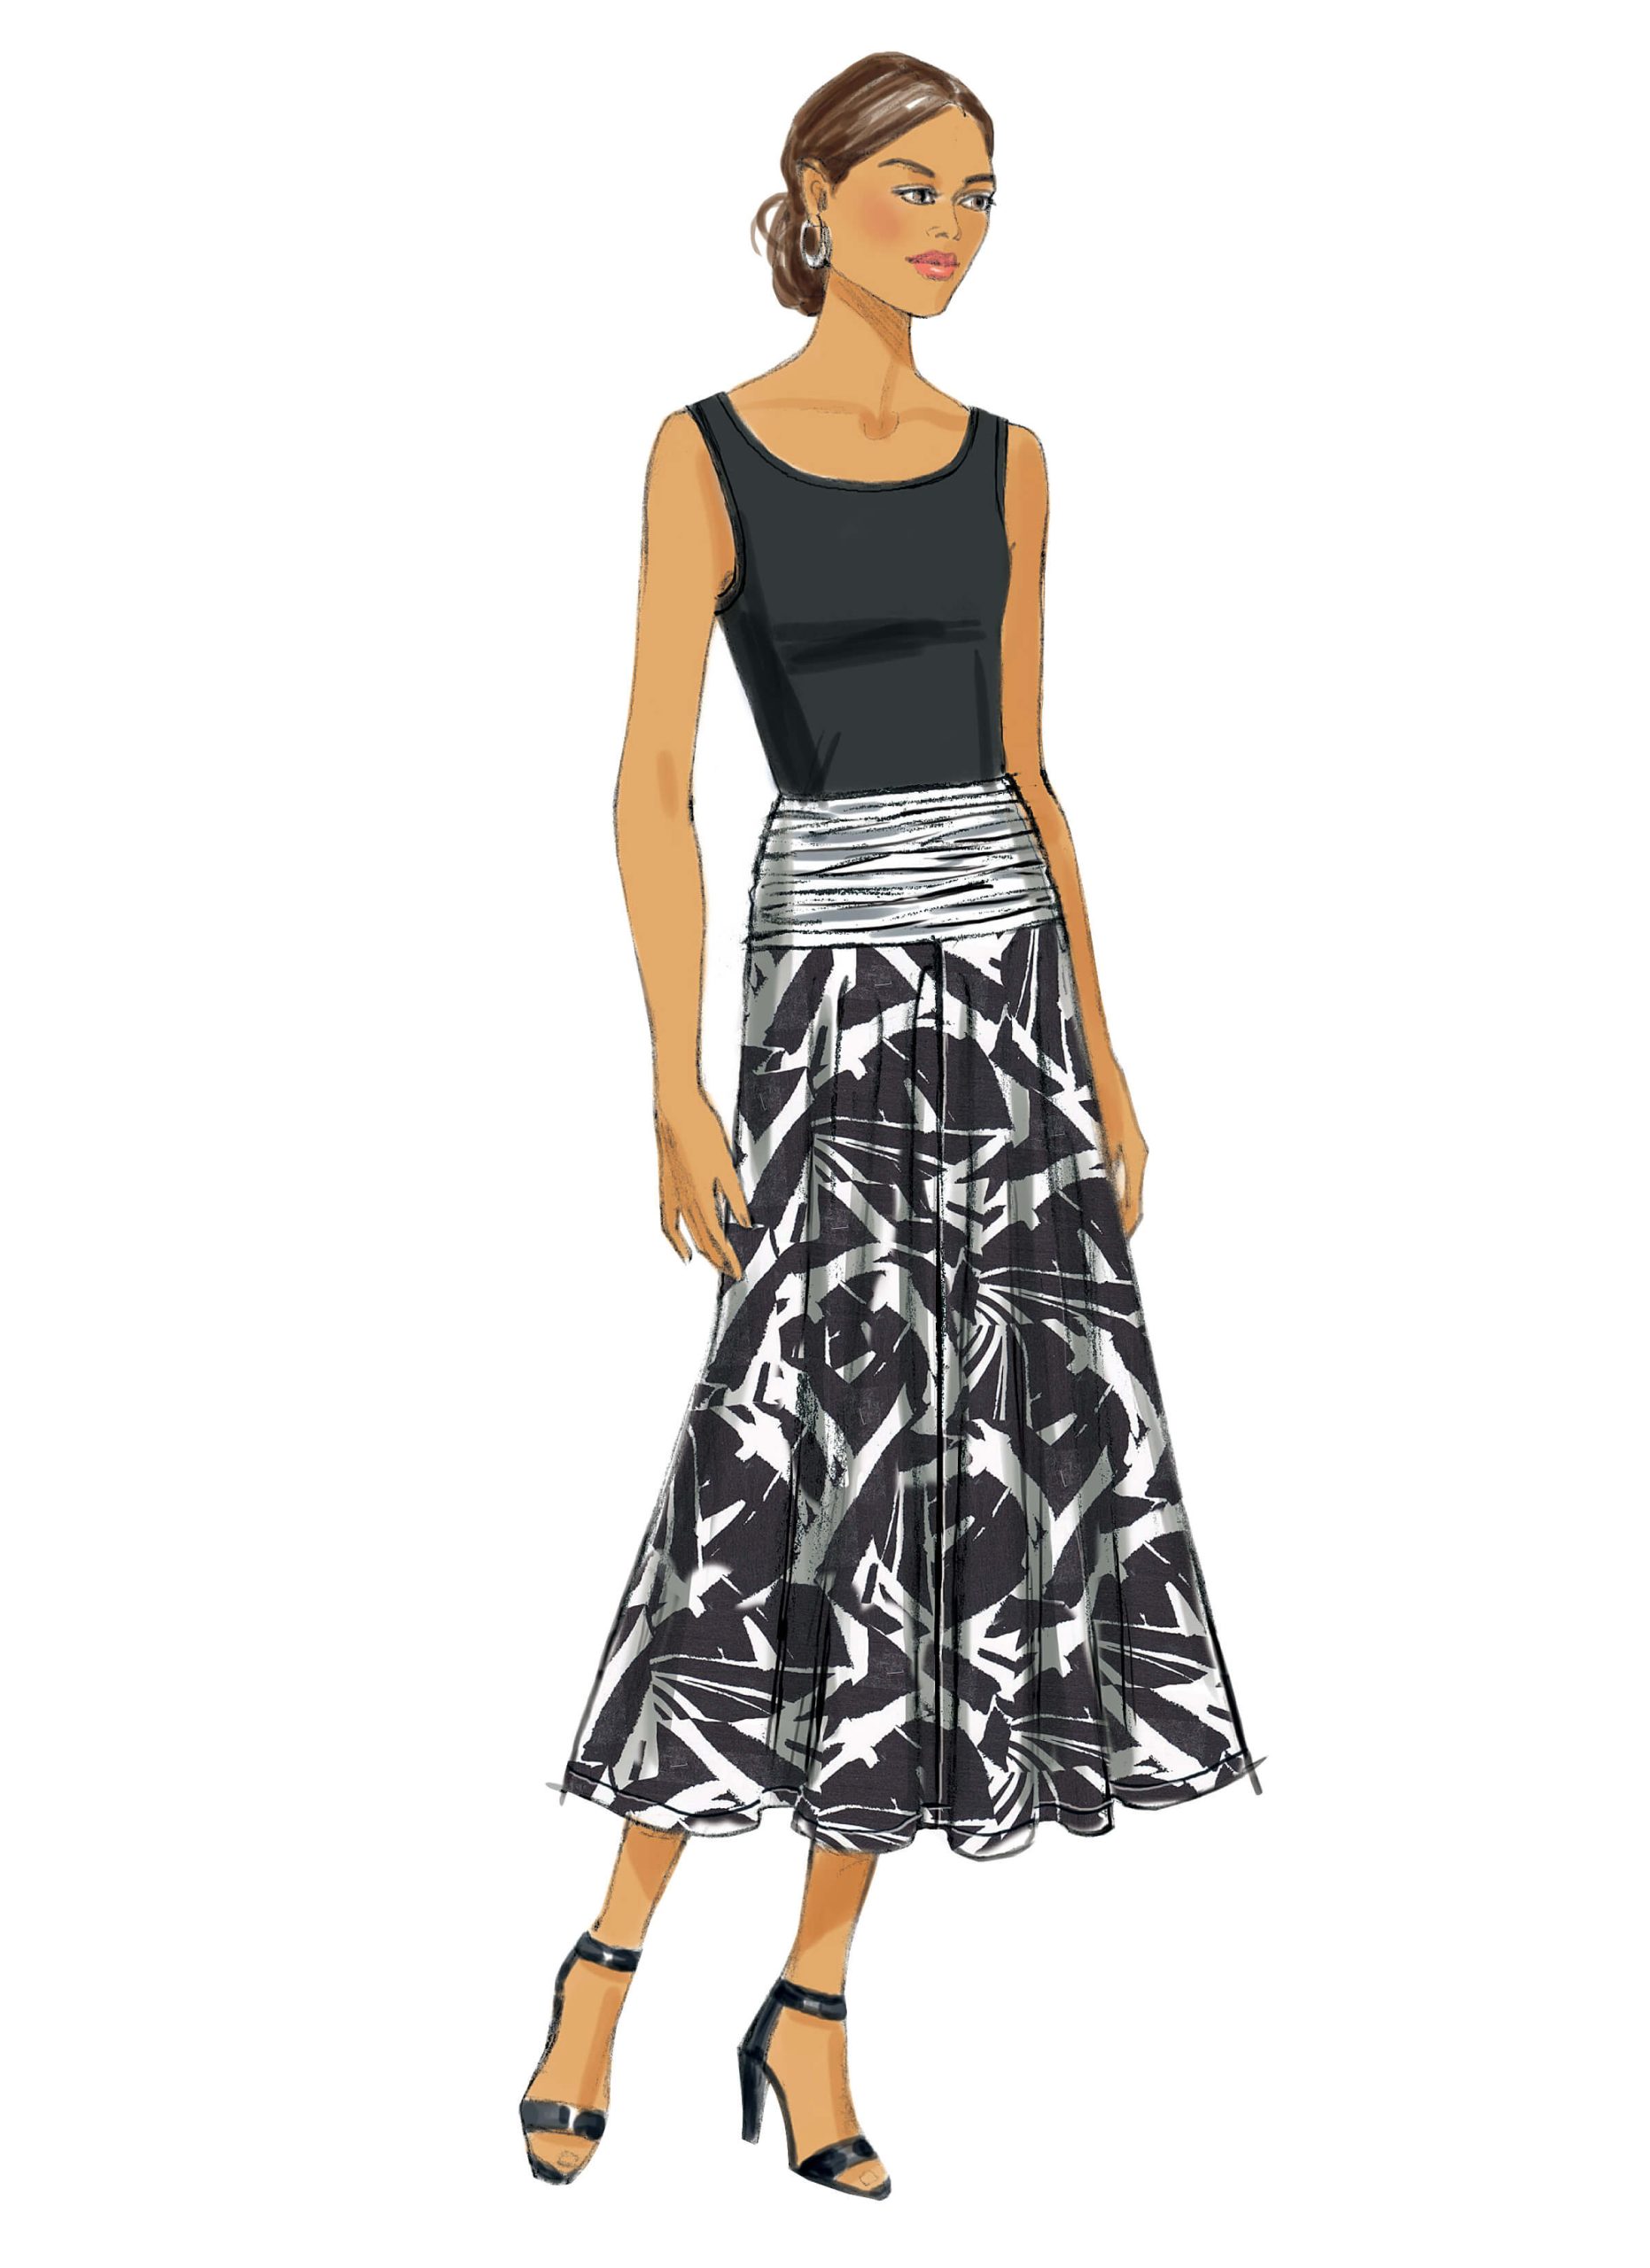 Butterick Sewing Pattern B6249 Misses' Skirt